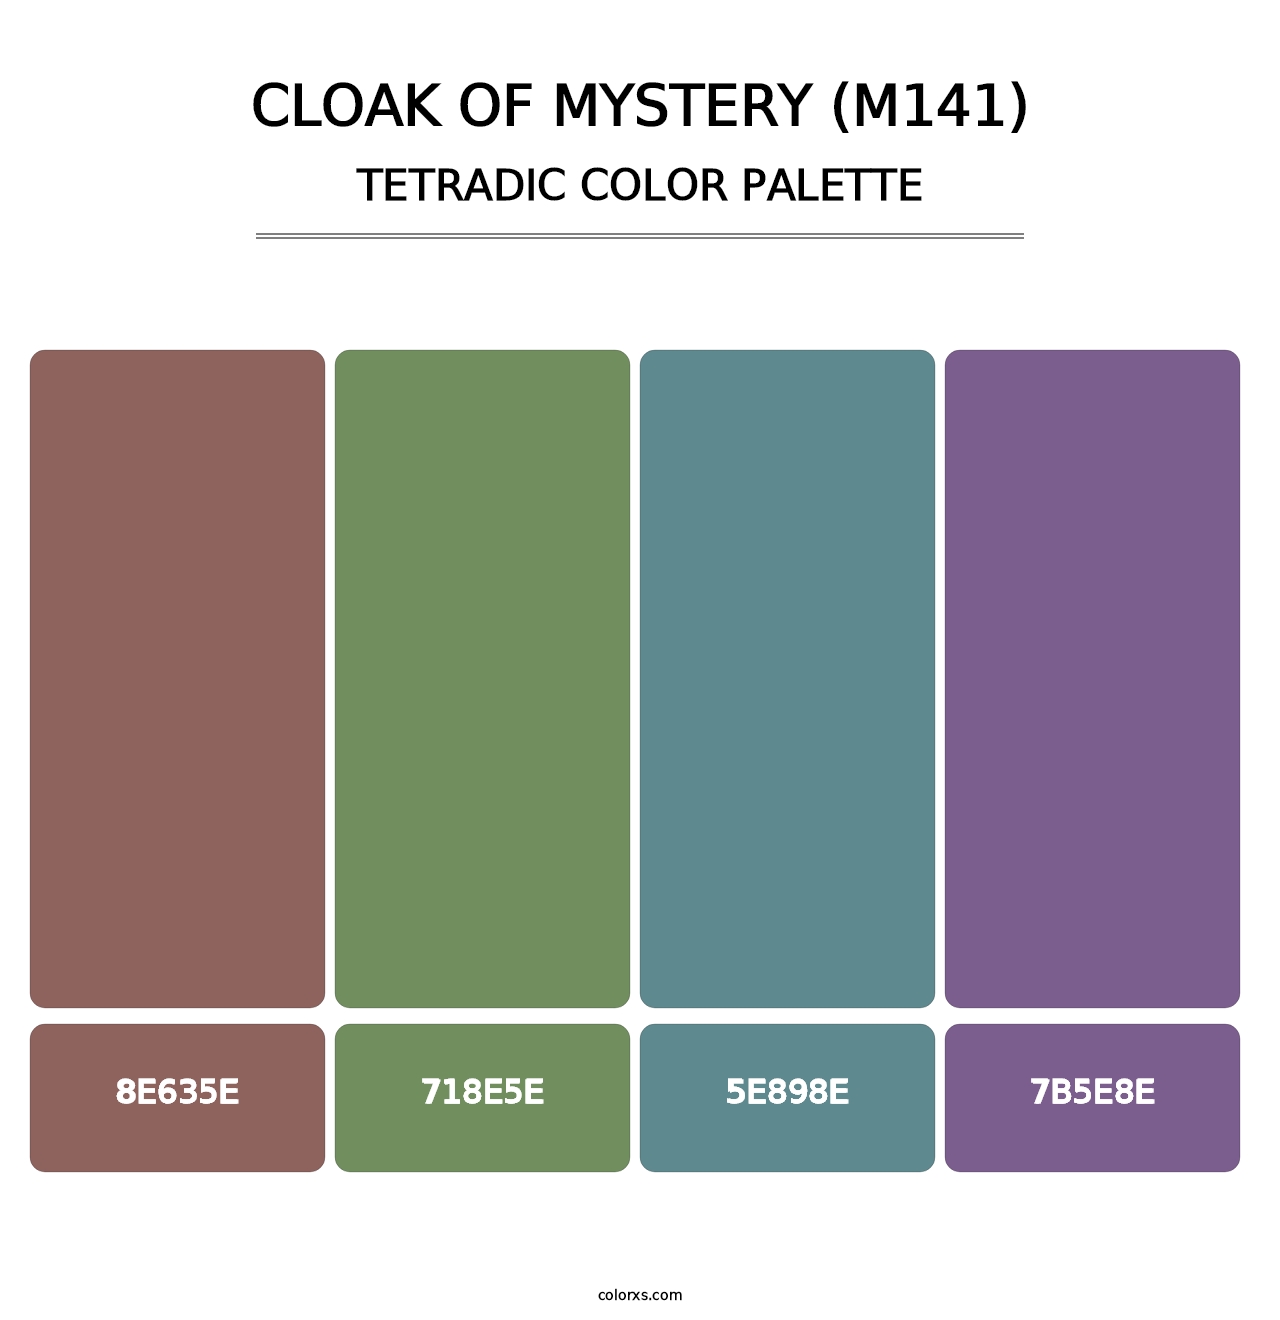 Cloak of Mystery (M141) - Tetradic Color Palette